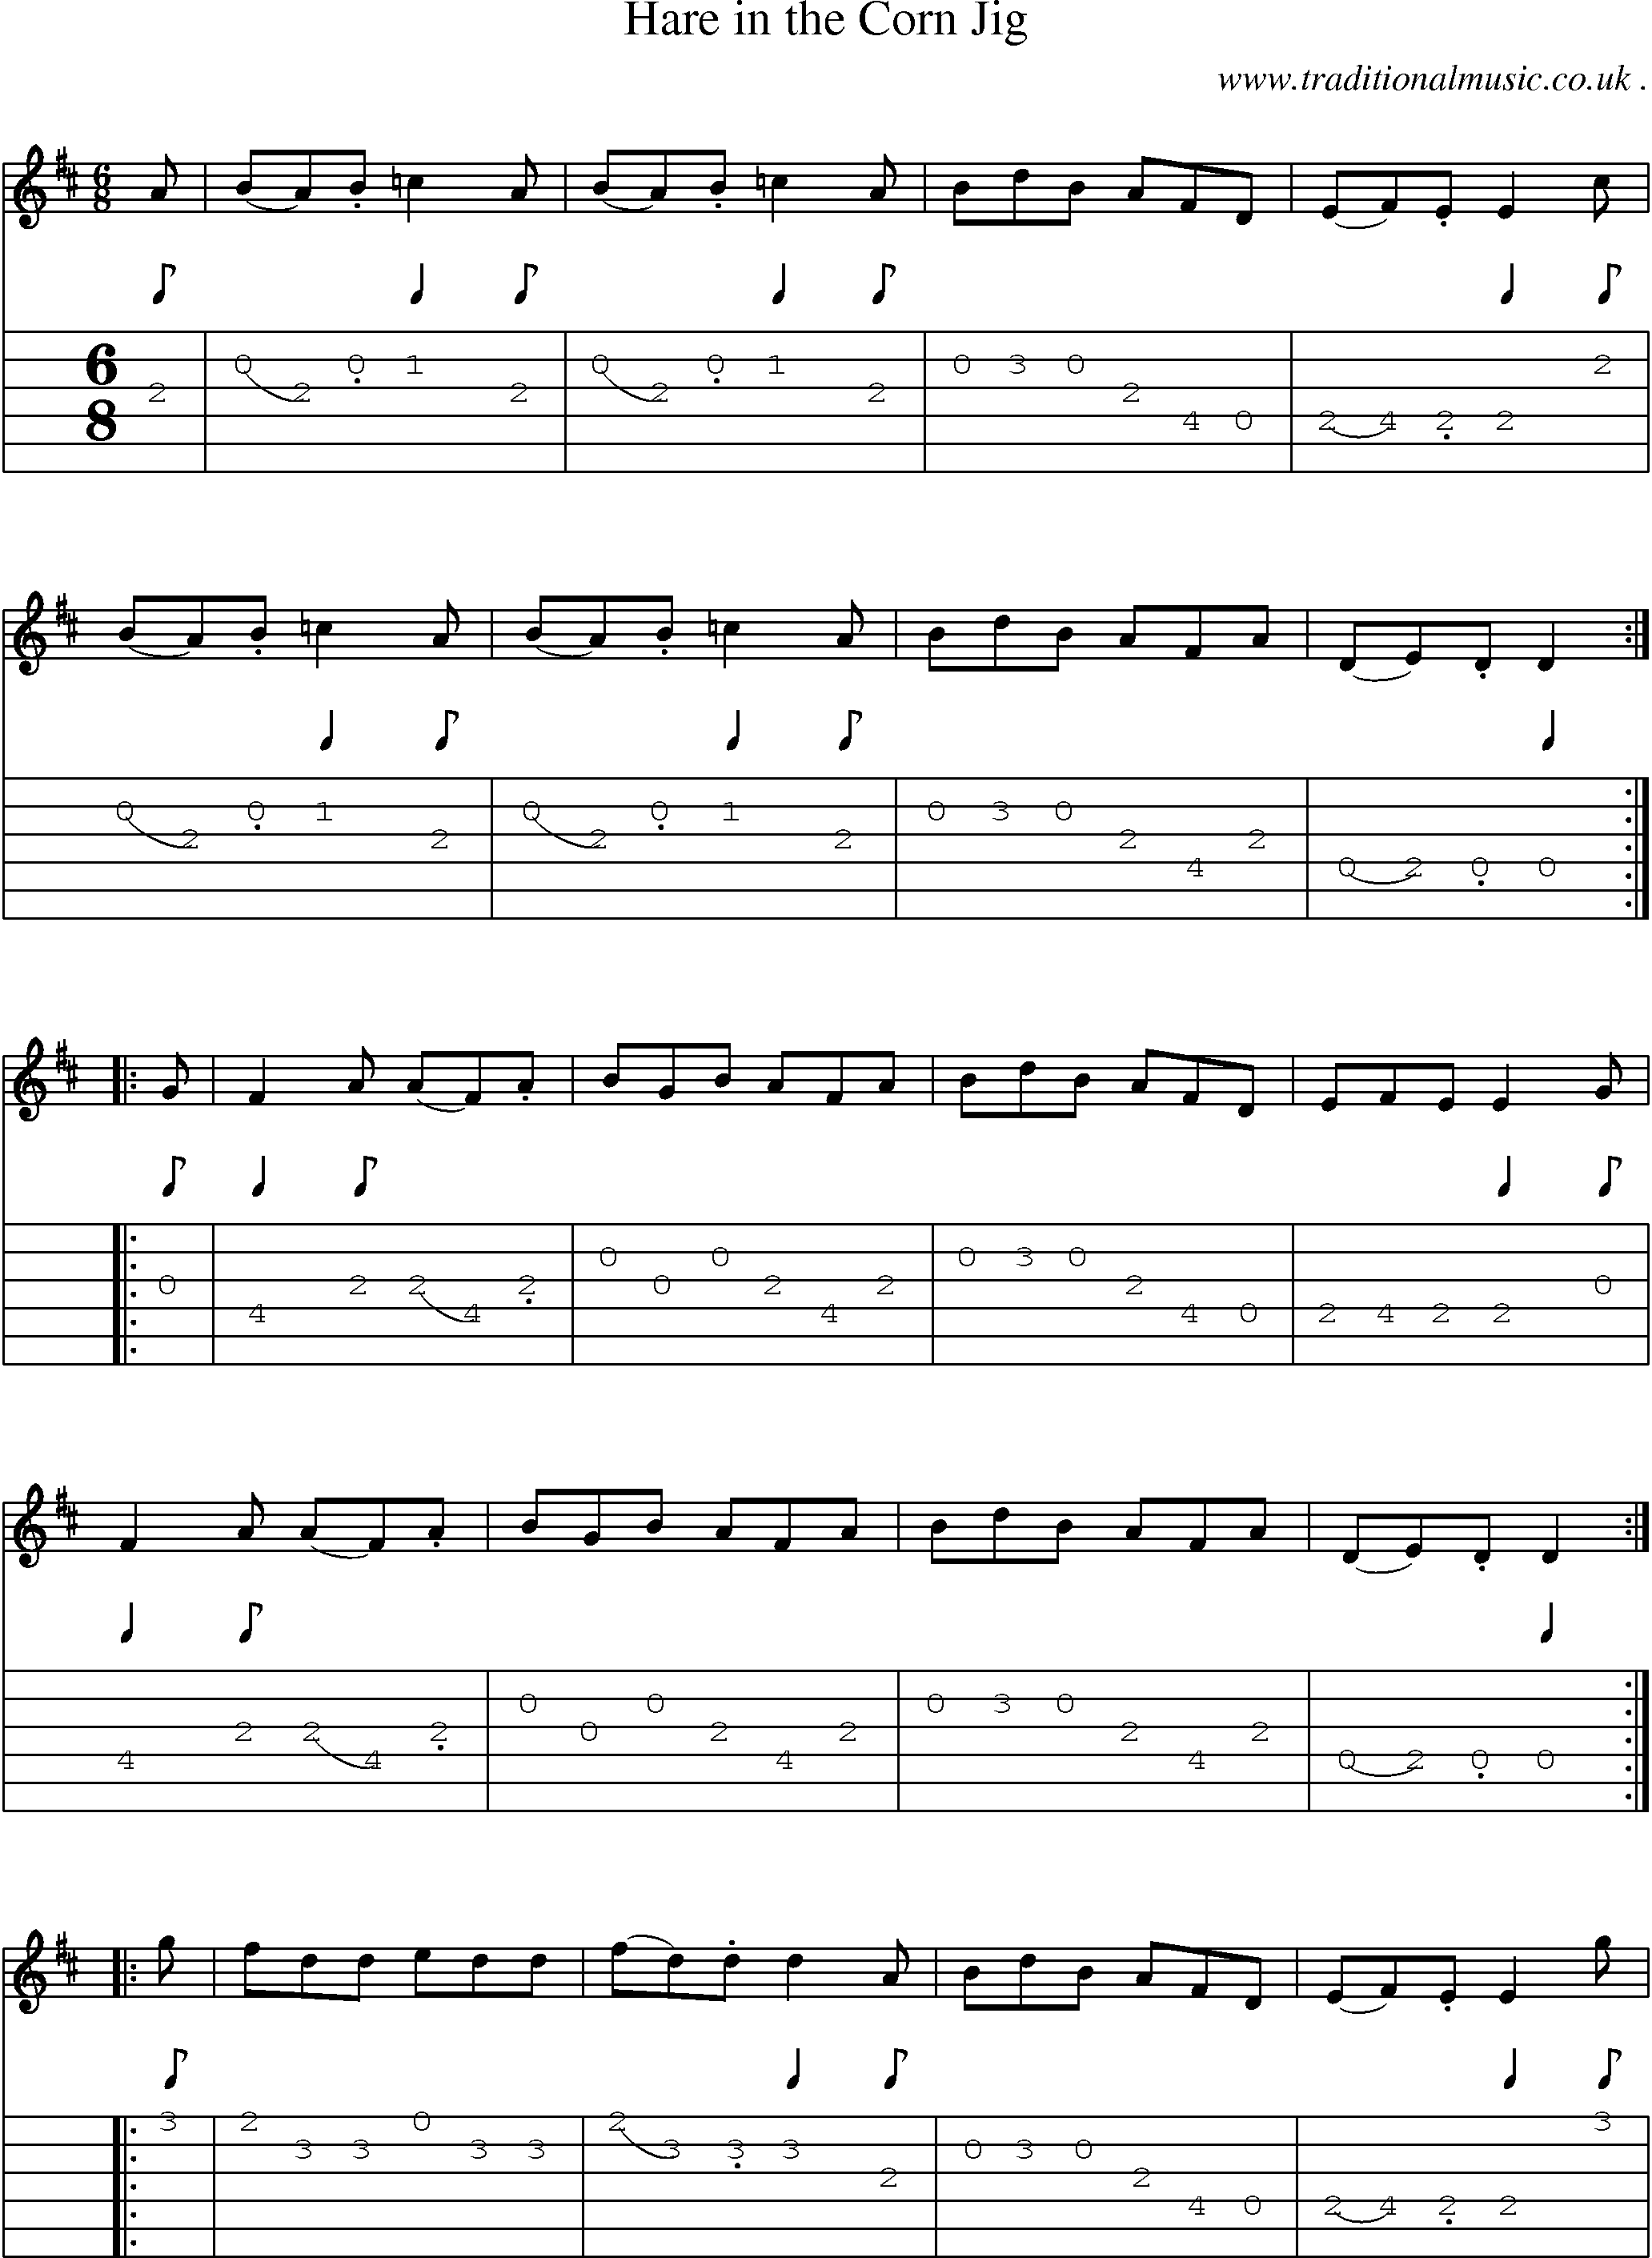 Sheet-Music and Guitar Tabs for Hare In The Corn Jig